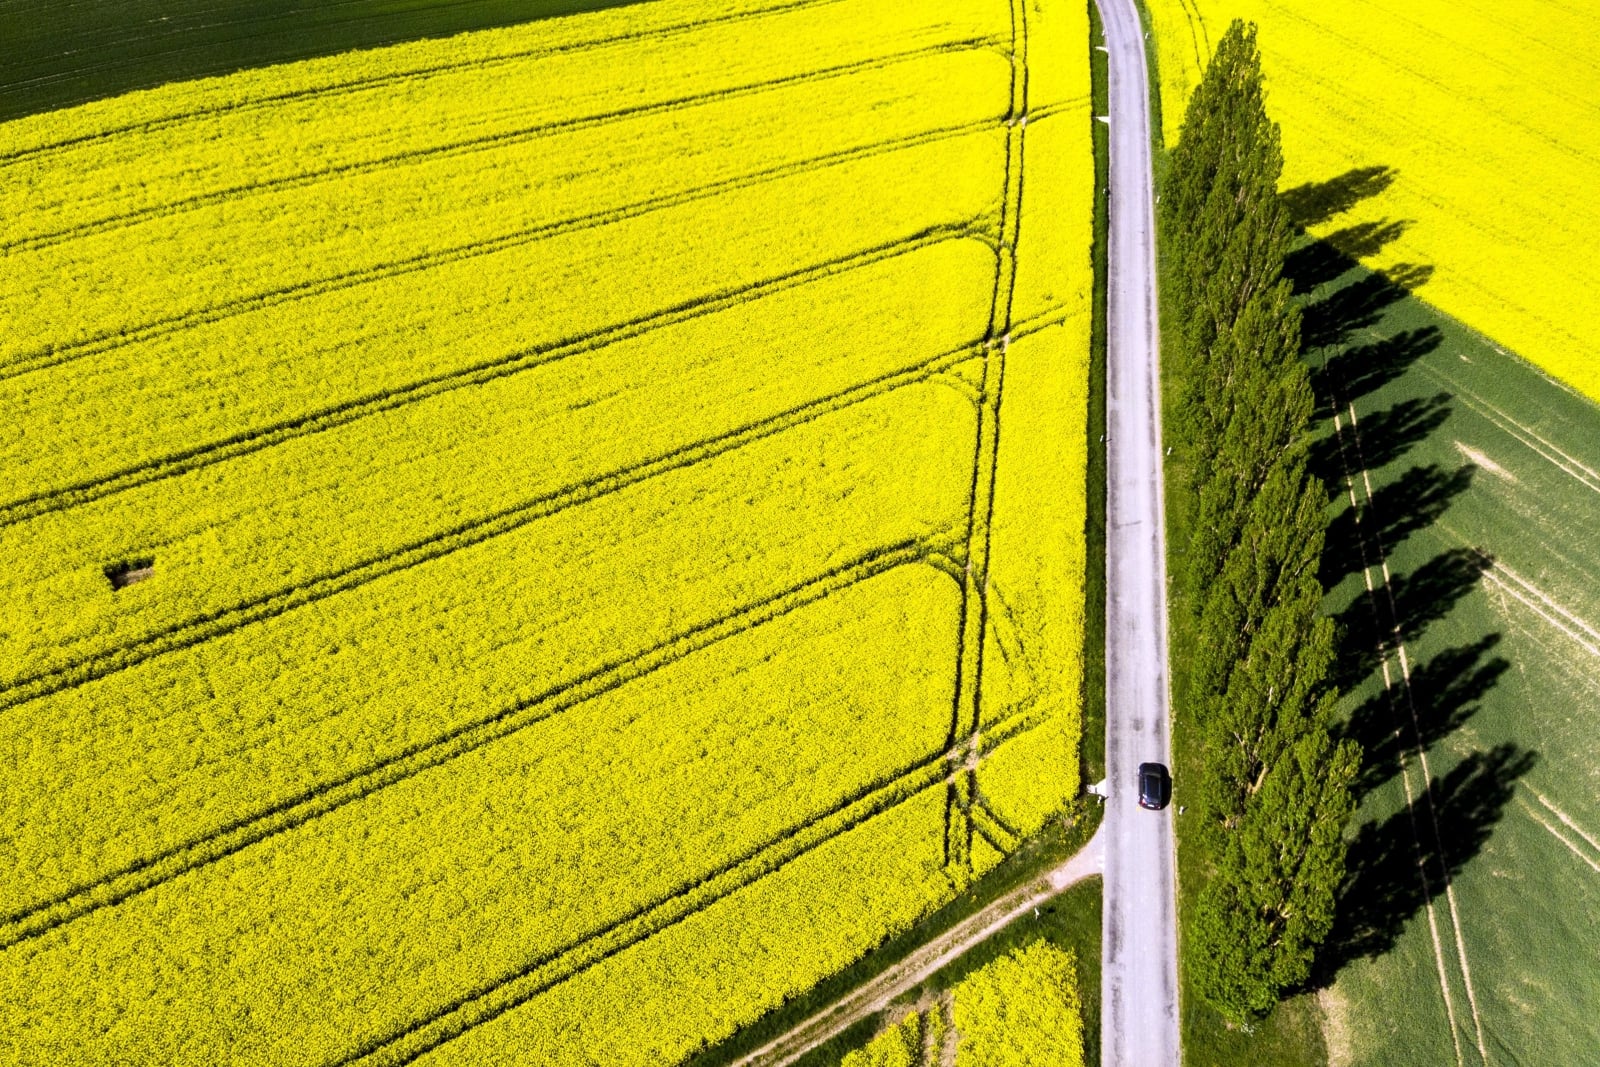 epa06696510 An aerial view taken with a drone shows a car drives on the road next to poplars and rapeseed field with bright-yellow flowers during a sunny and warm weather spring day, in Daillens, Switzerland, 27 April 2018.  EPA/LAURENT GILLIERON 
Dostawca: PAP/EPA.